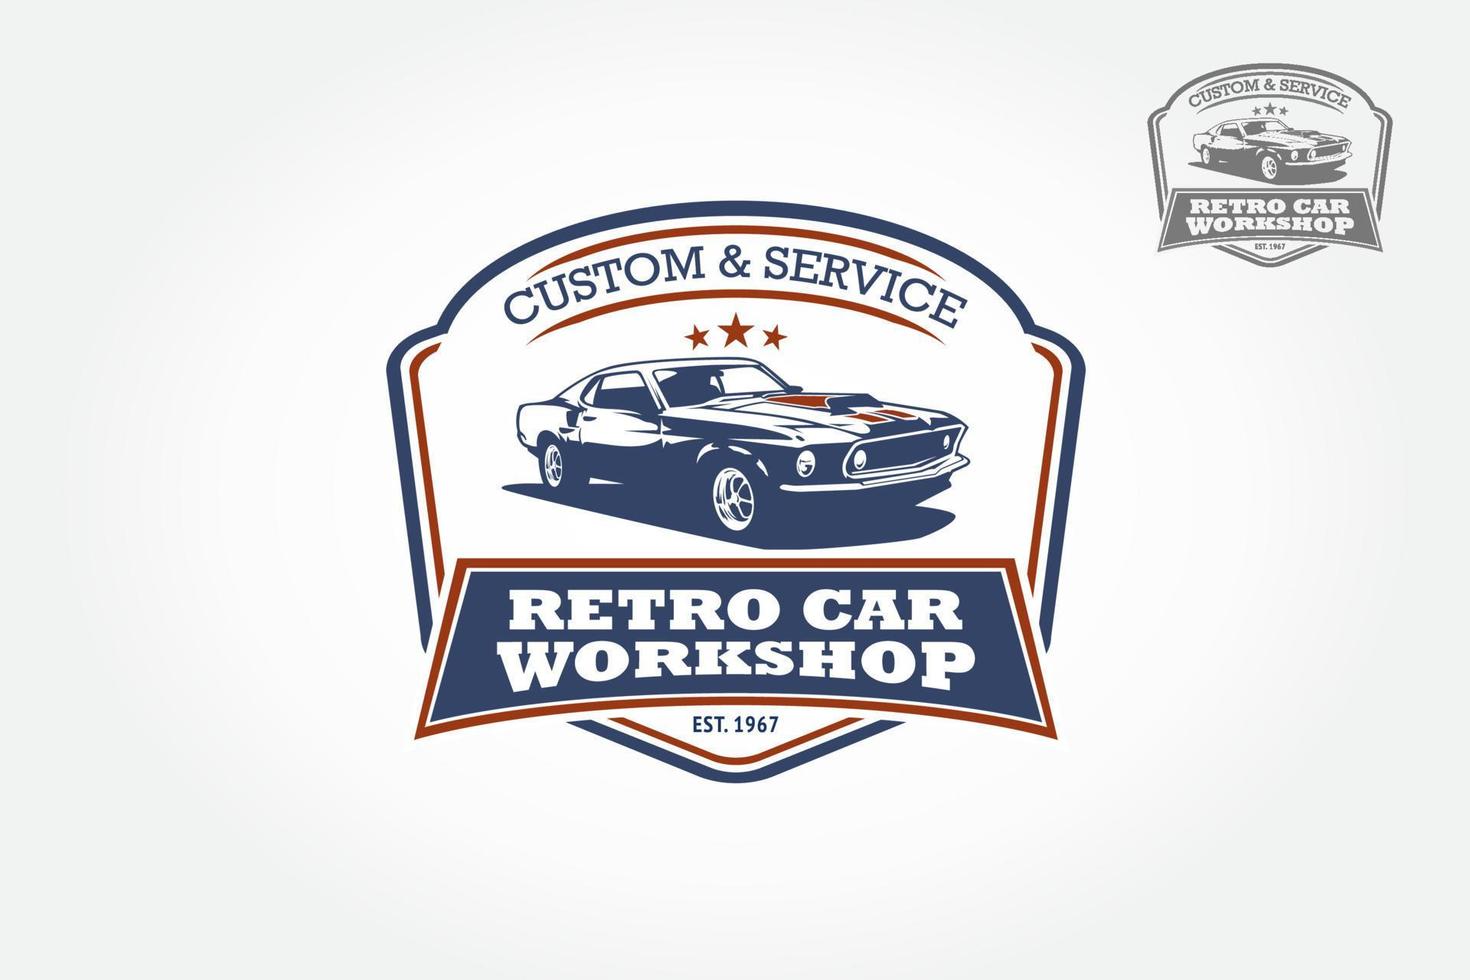 Retro Car Workshop Logo Design.This logo can be used for old style or classic car shops, repair, restorations. vector